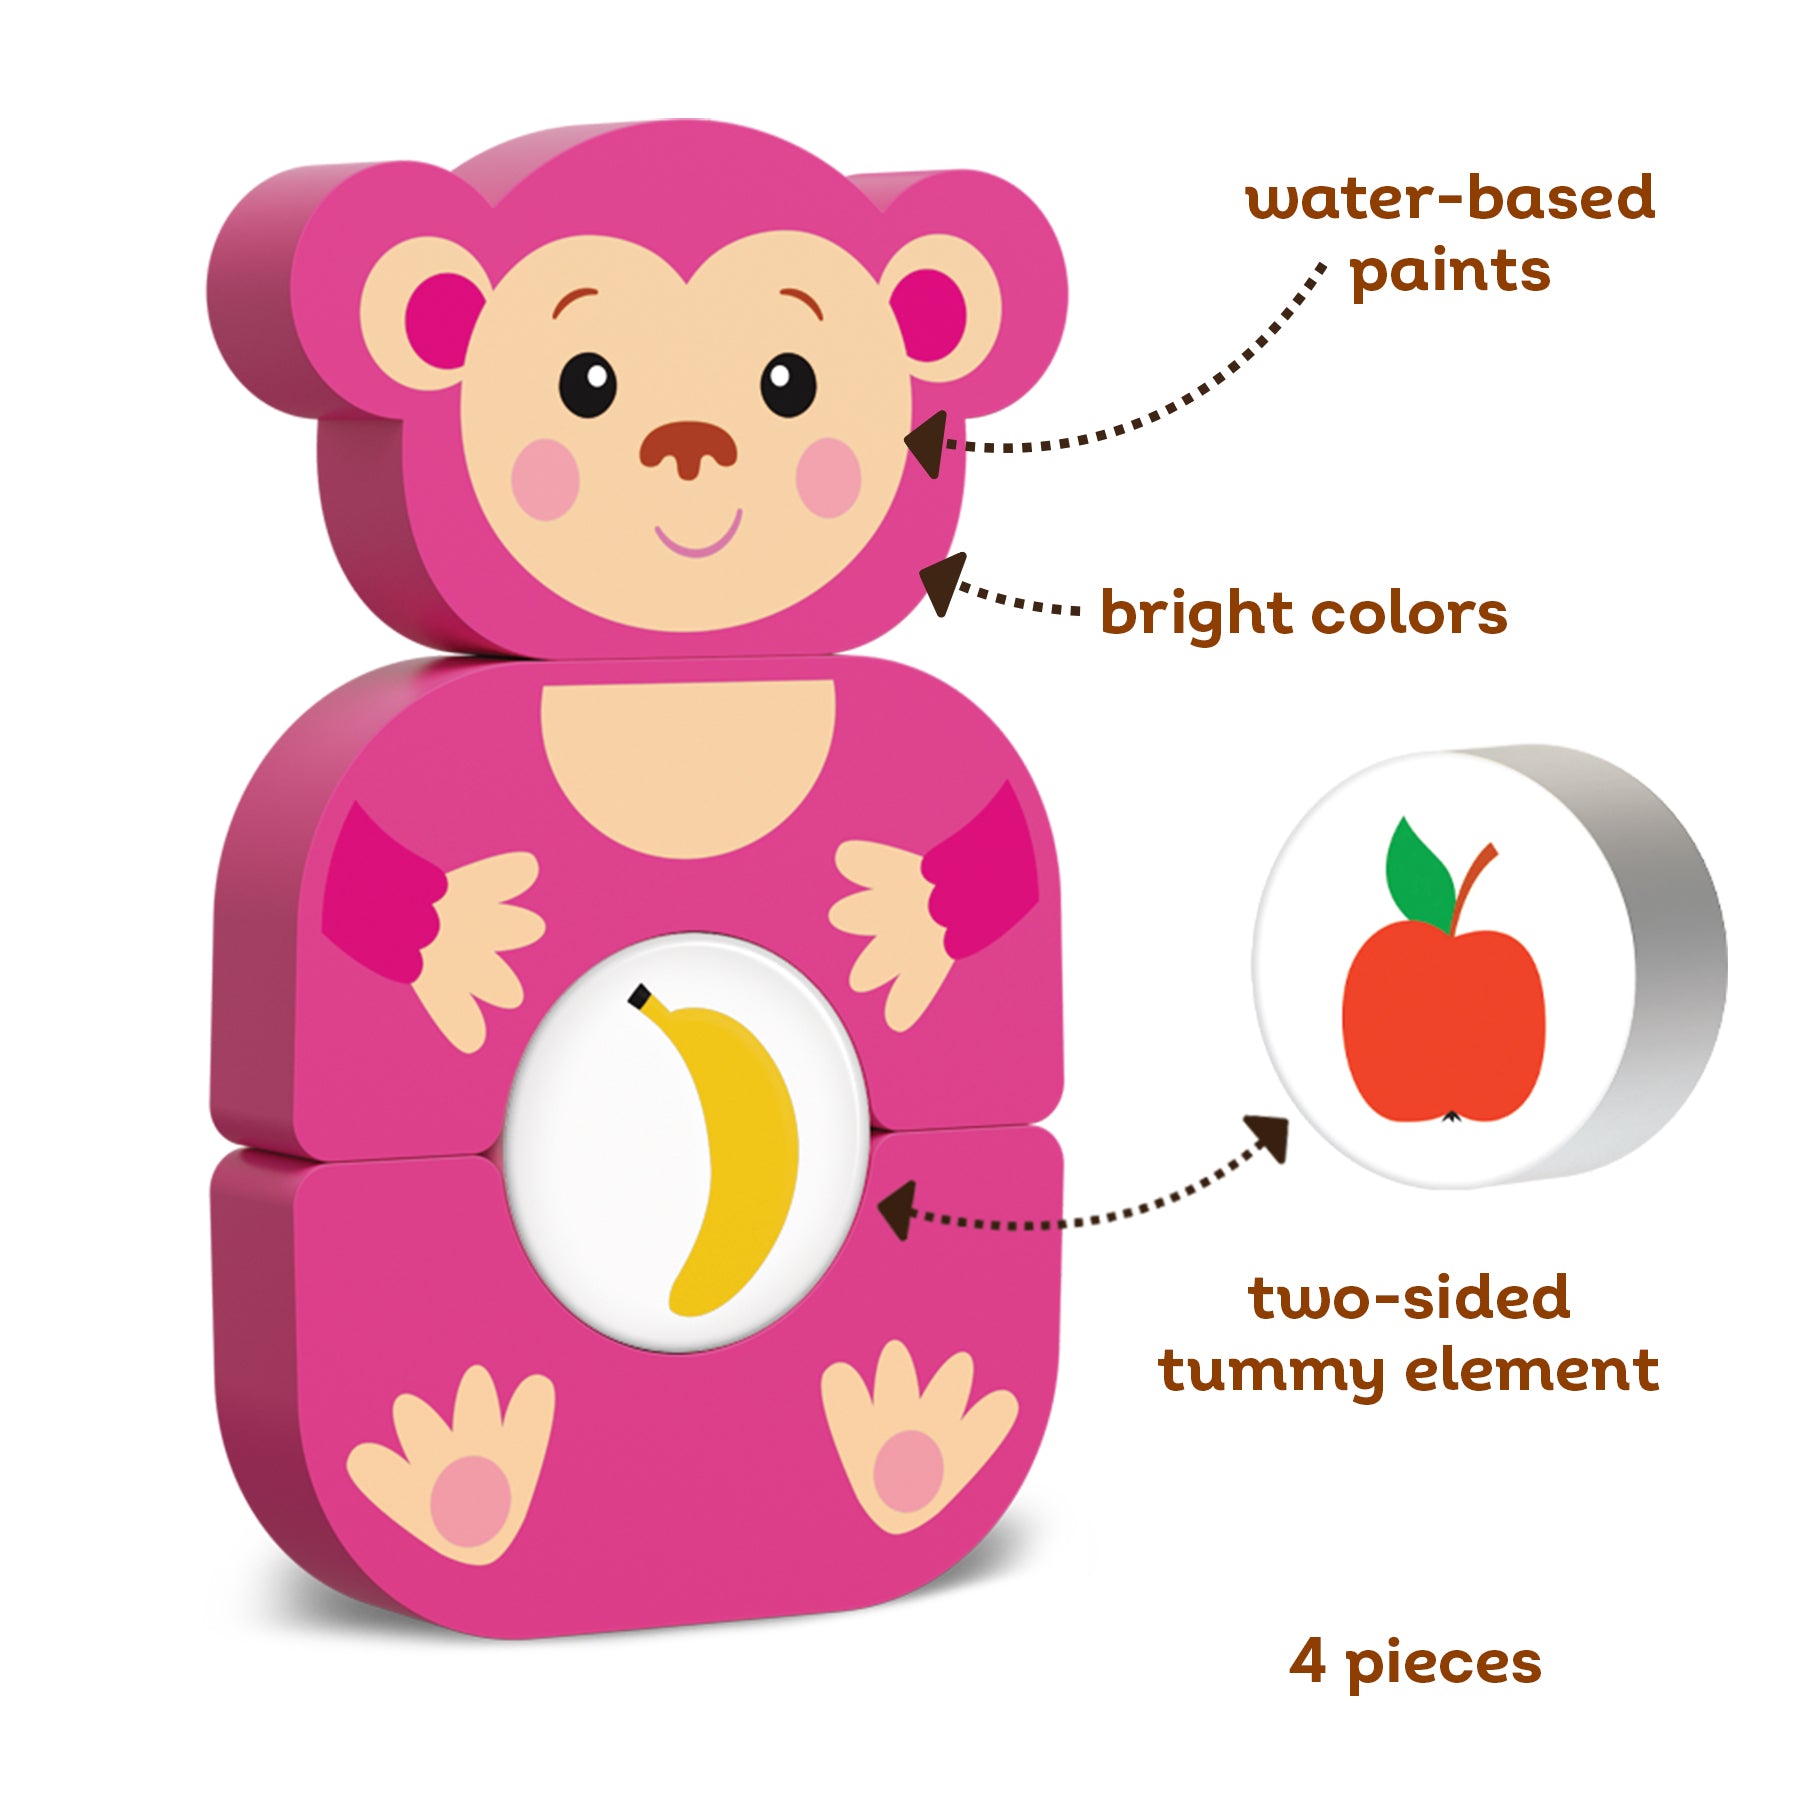 Kids Hits: Wooden Toy - Unleash Creativity with the Funny Monkey Build-and-Match Game!